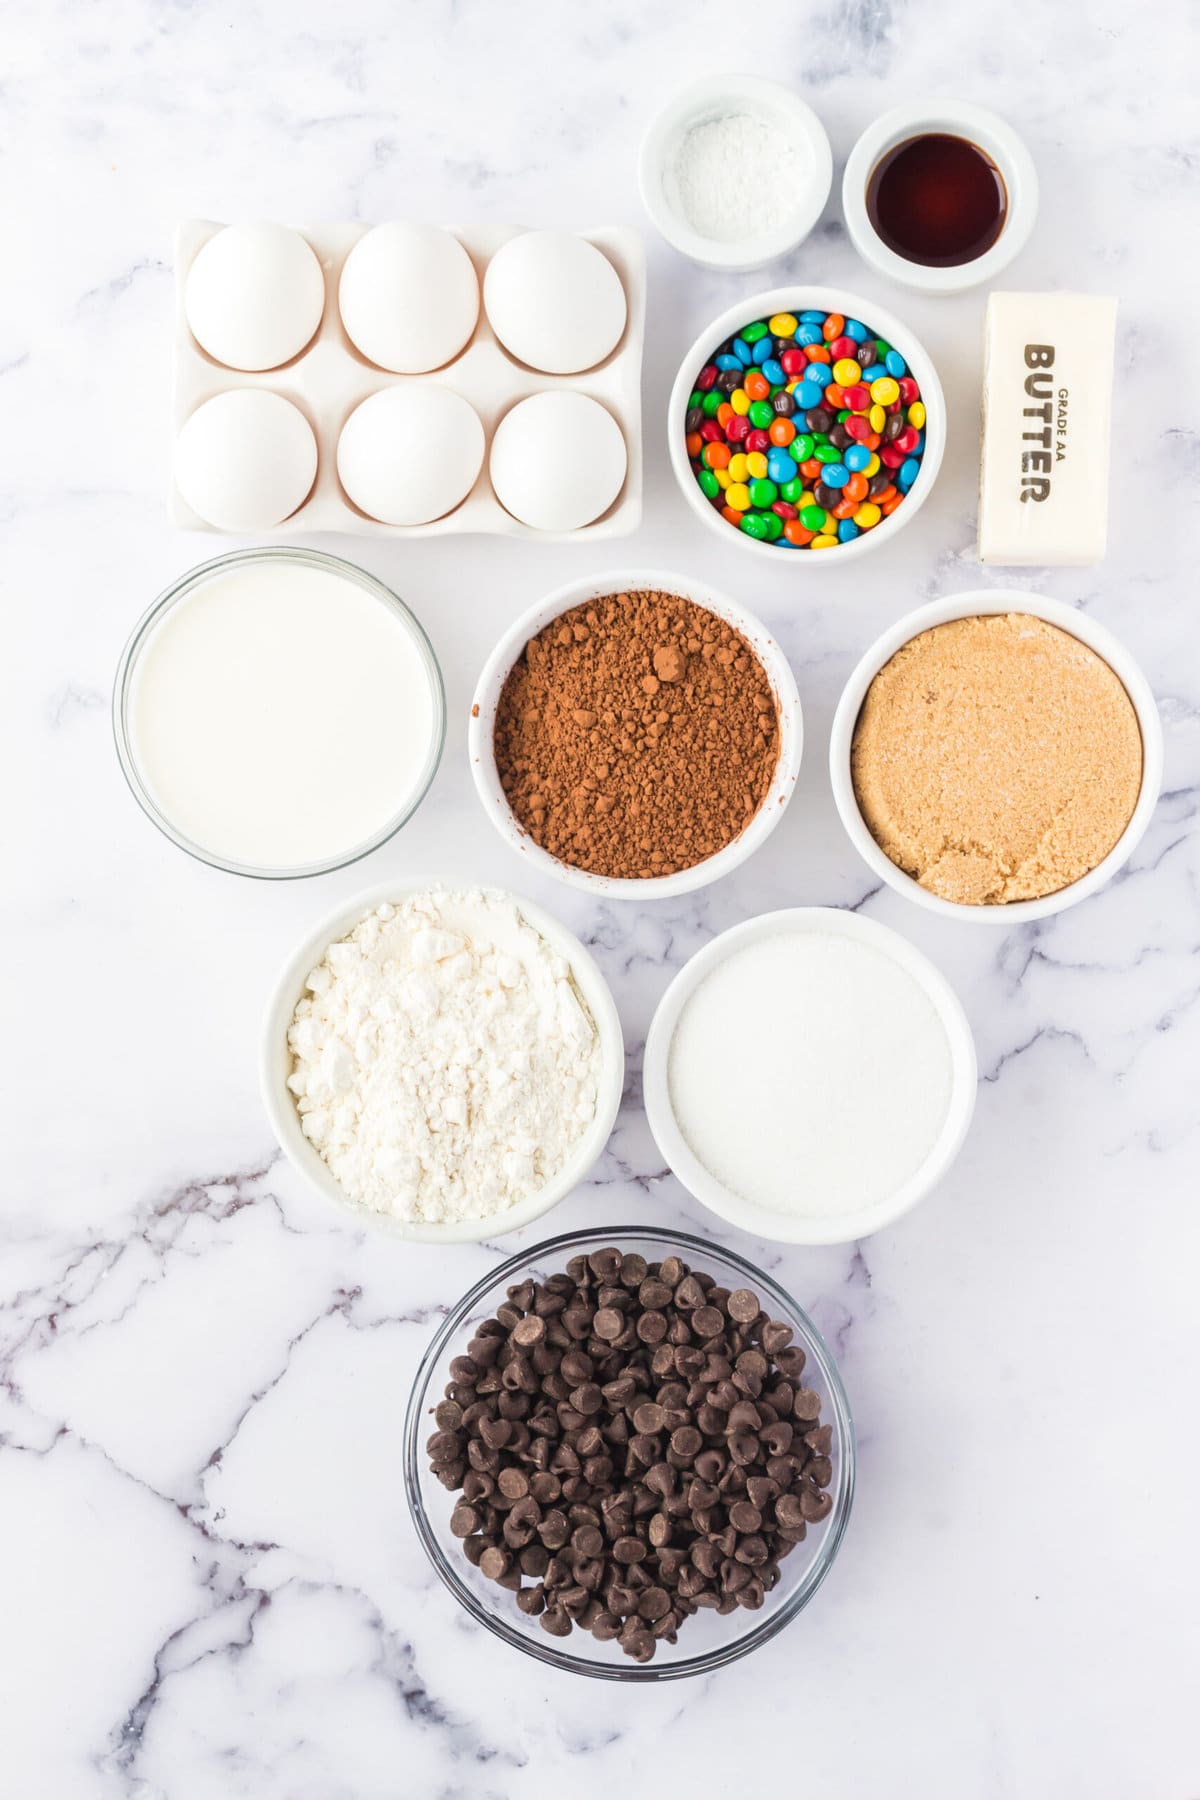 The ingredients for cosmic brownies are placed on a white surface.